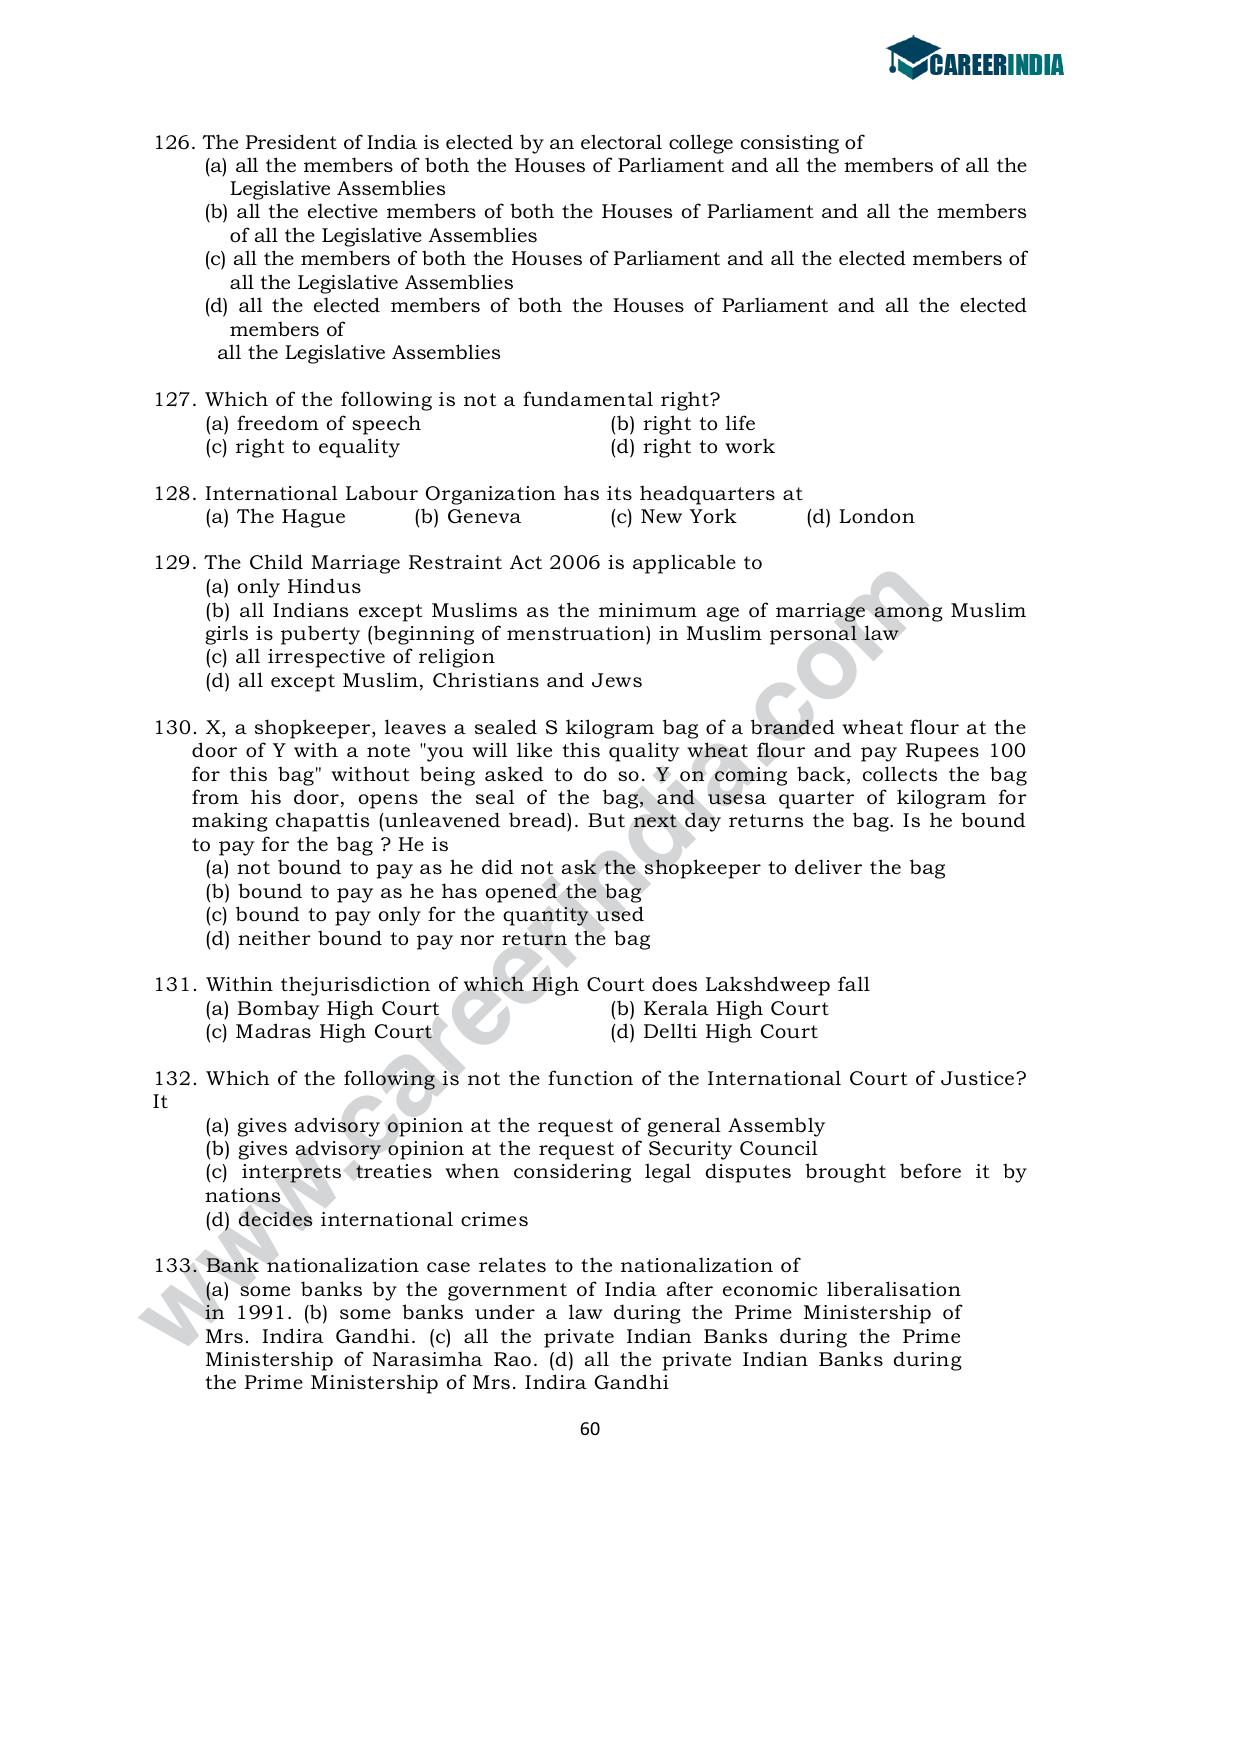 CLAT 2010 UG Sample Question Paper - Page 13